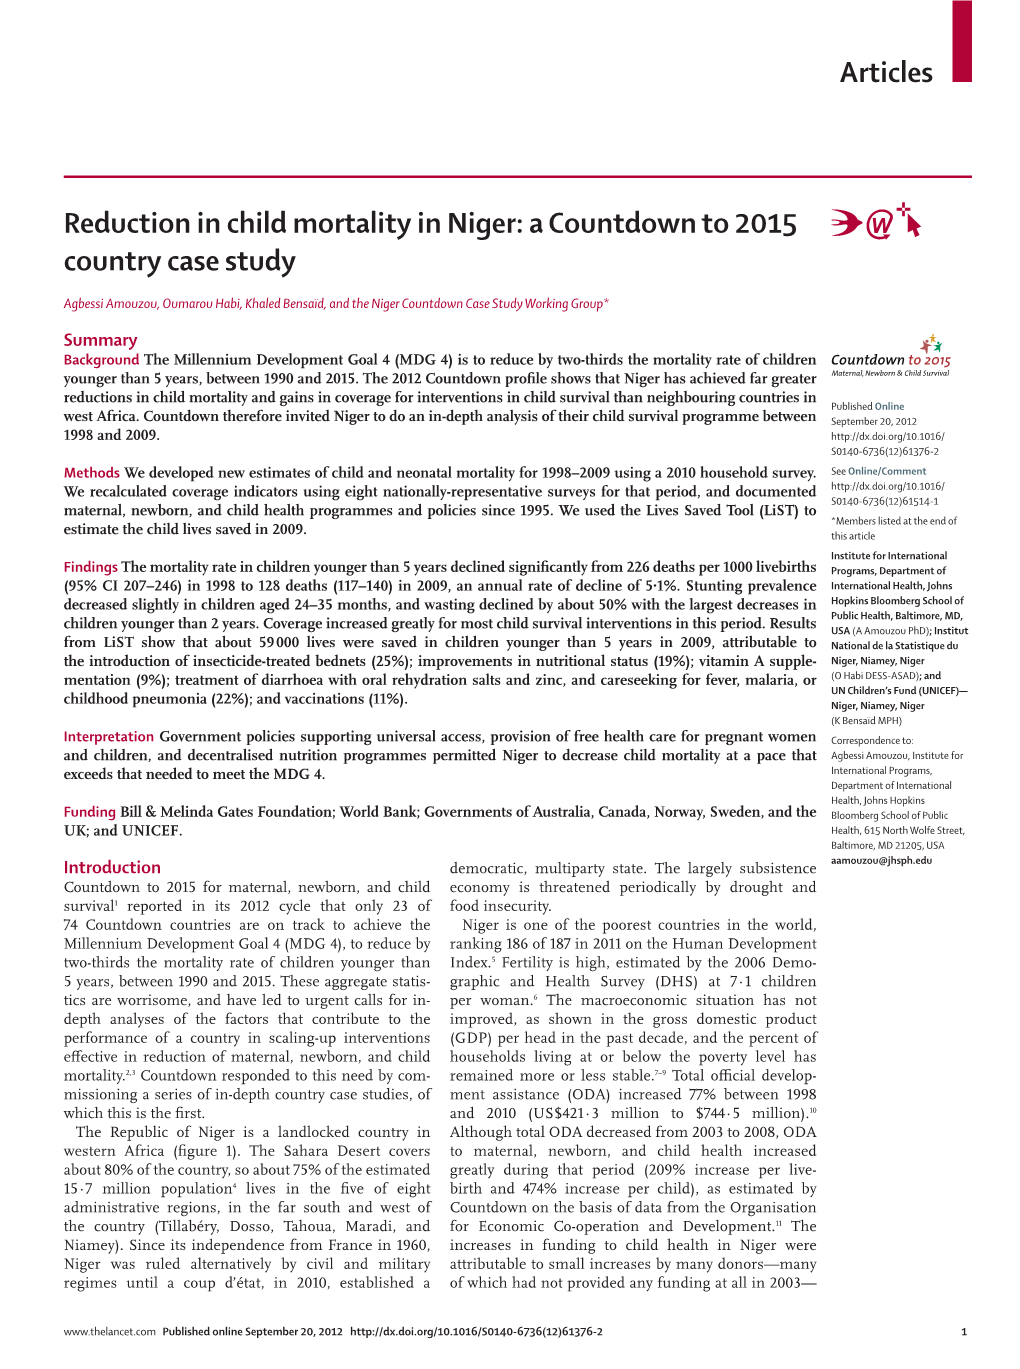 Articles Reduction in Child Mortality in Niger